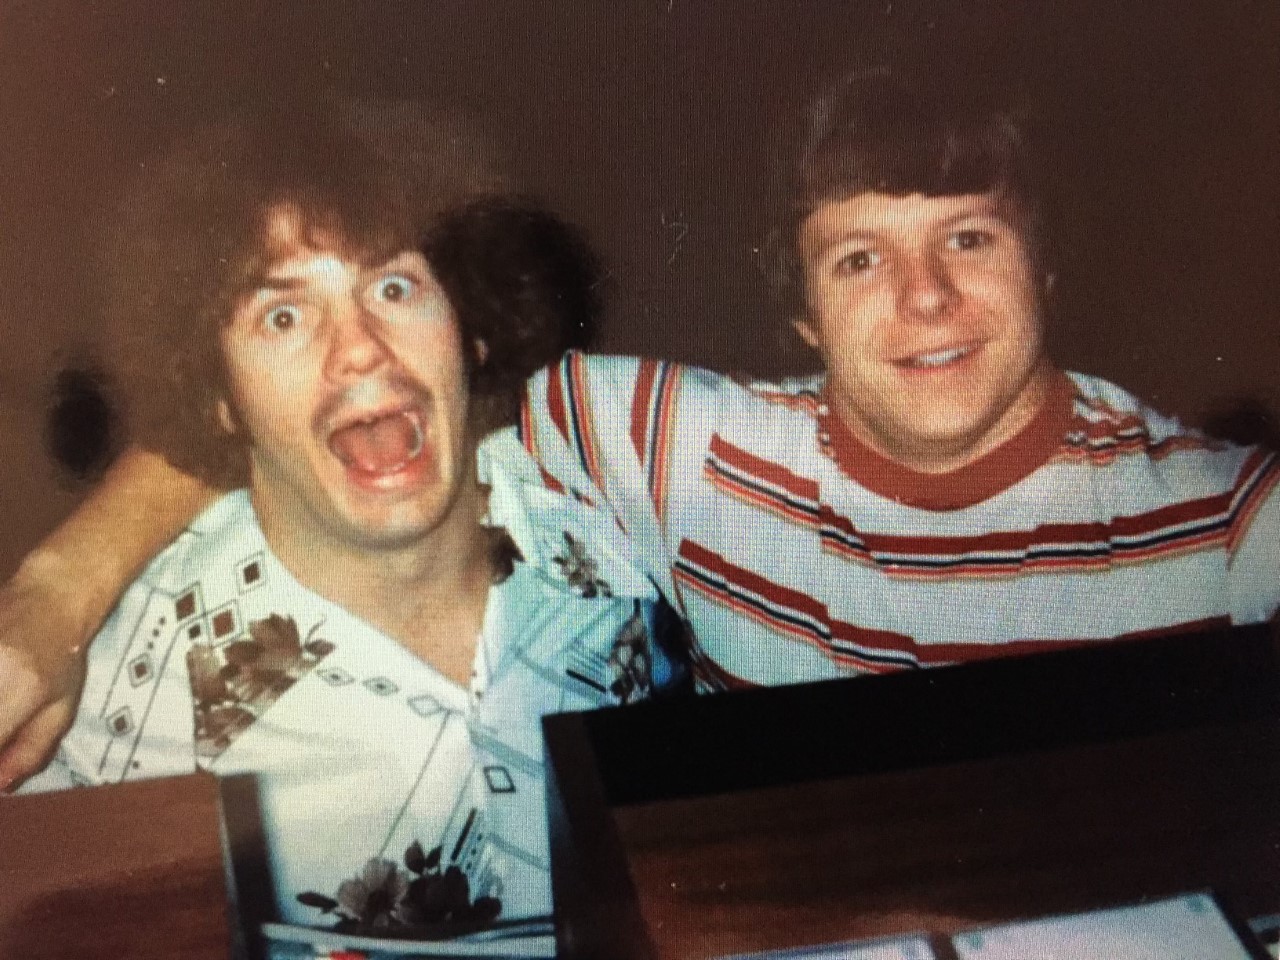 Curt Richard and Bob Phillips in college